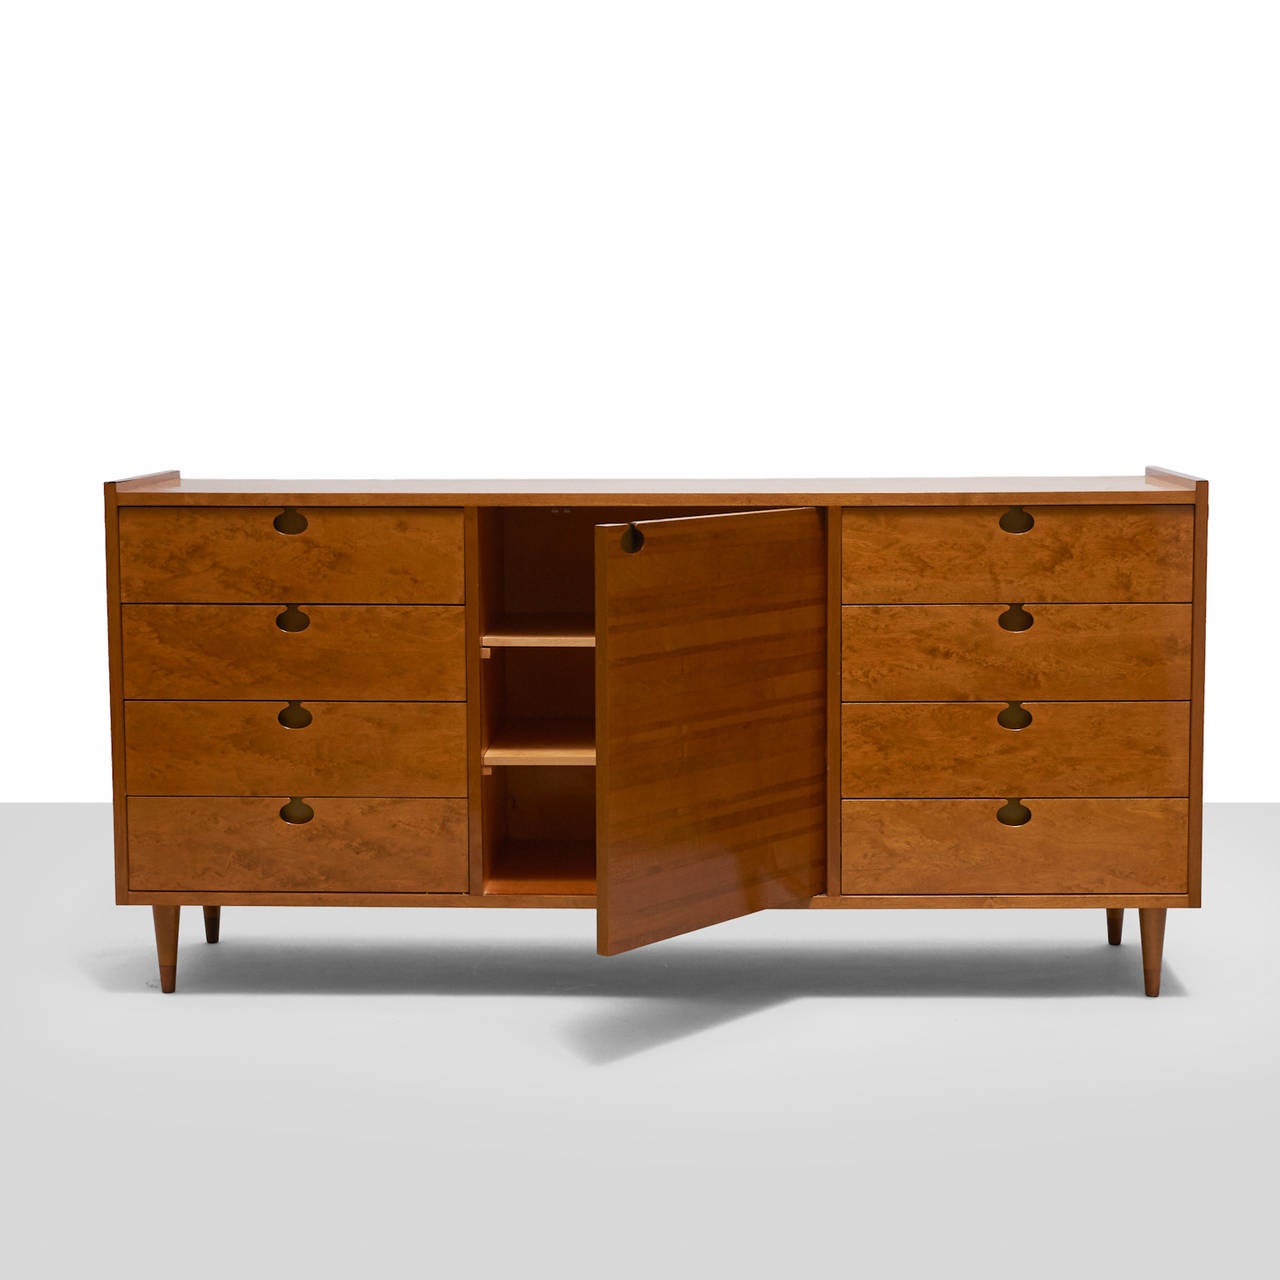 A wooden sideboard by Edmond J. Spence of maple with eight pull-out drawers and cabinet. Center section encloses storage area with three shelves and handle shaped trompe l’oeil cut-out with brass plate.